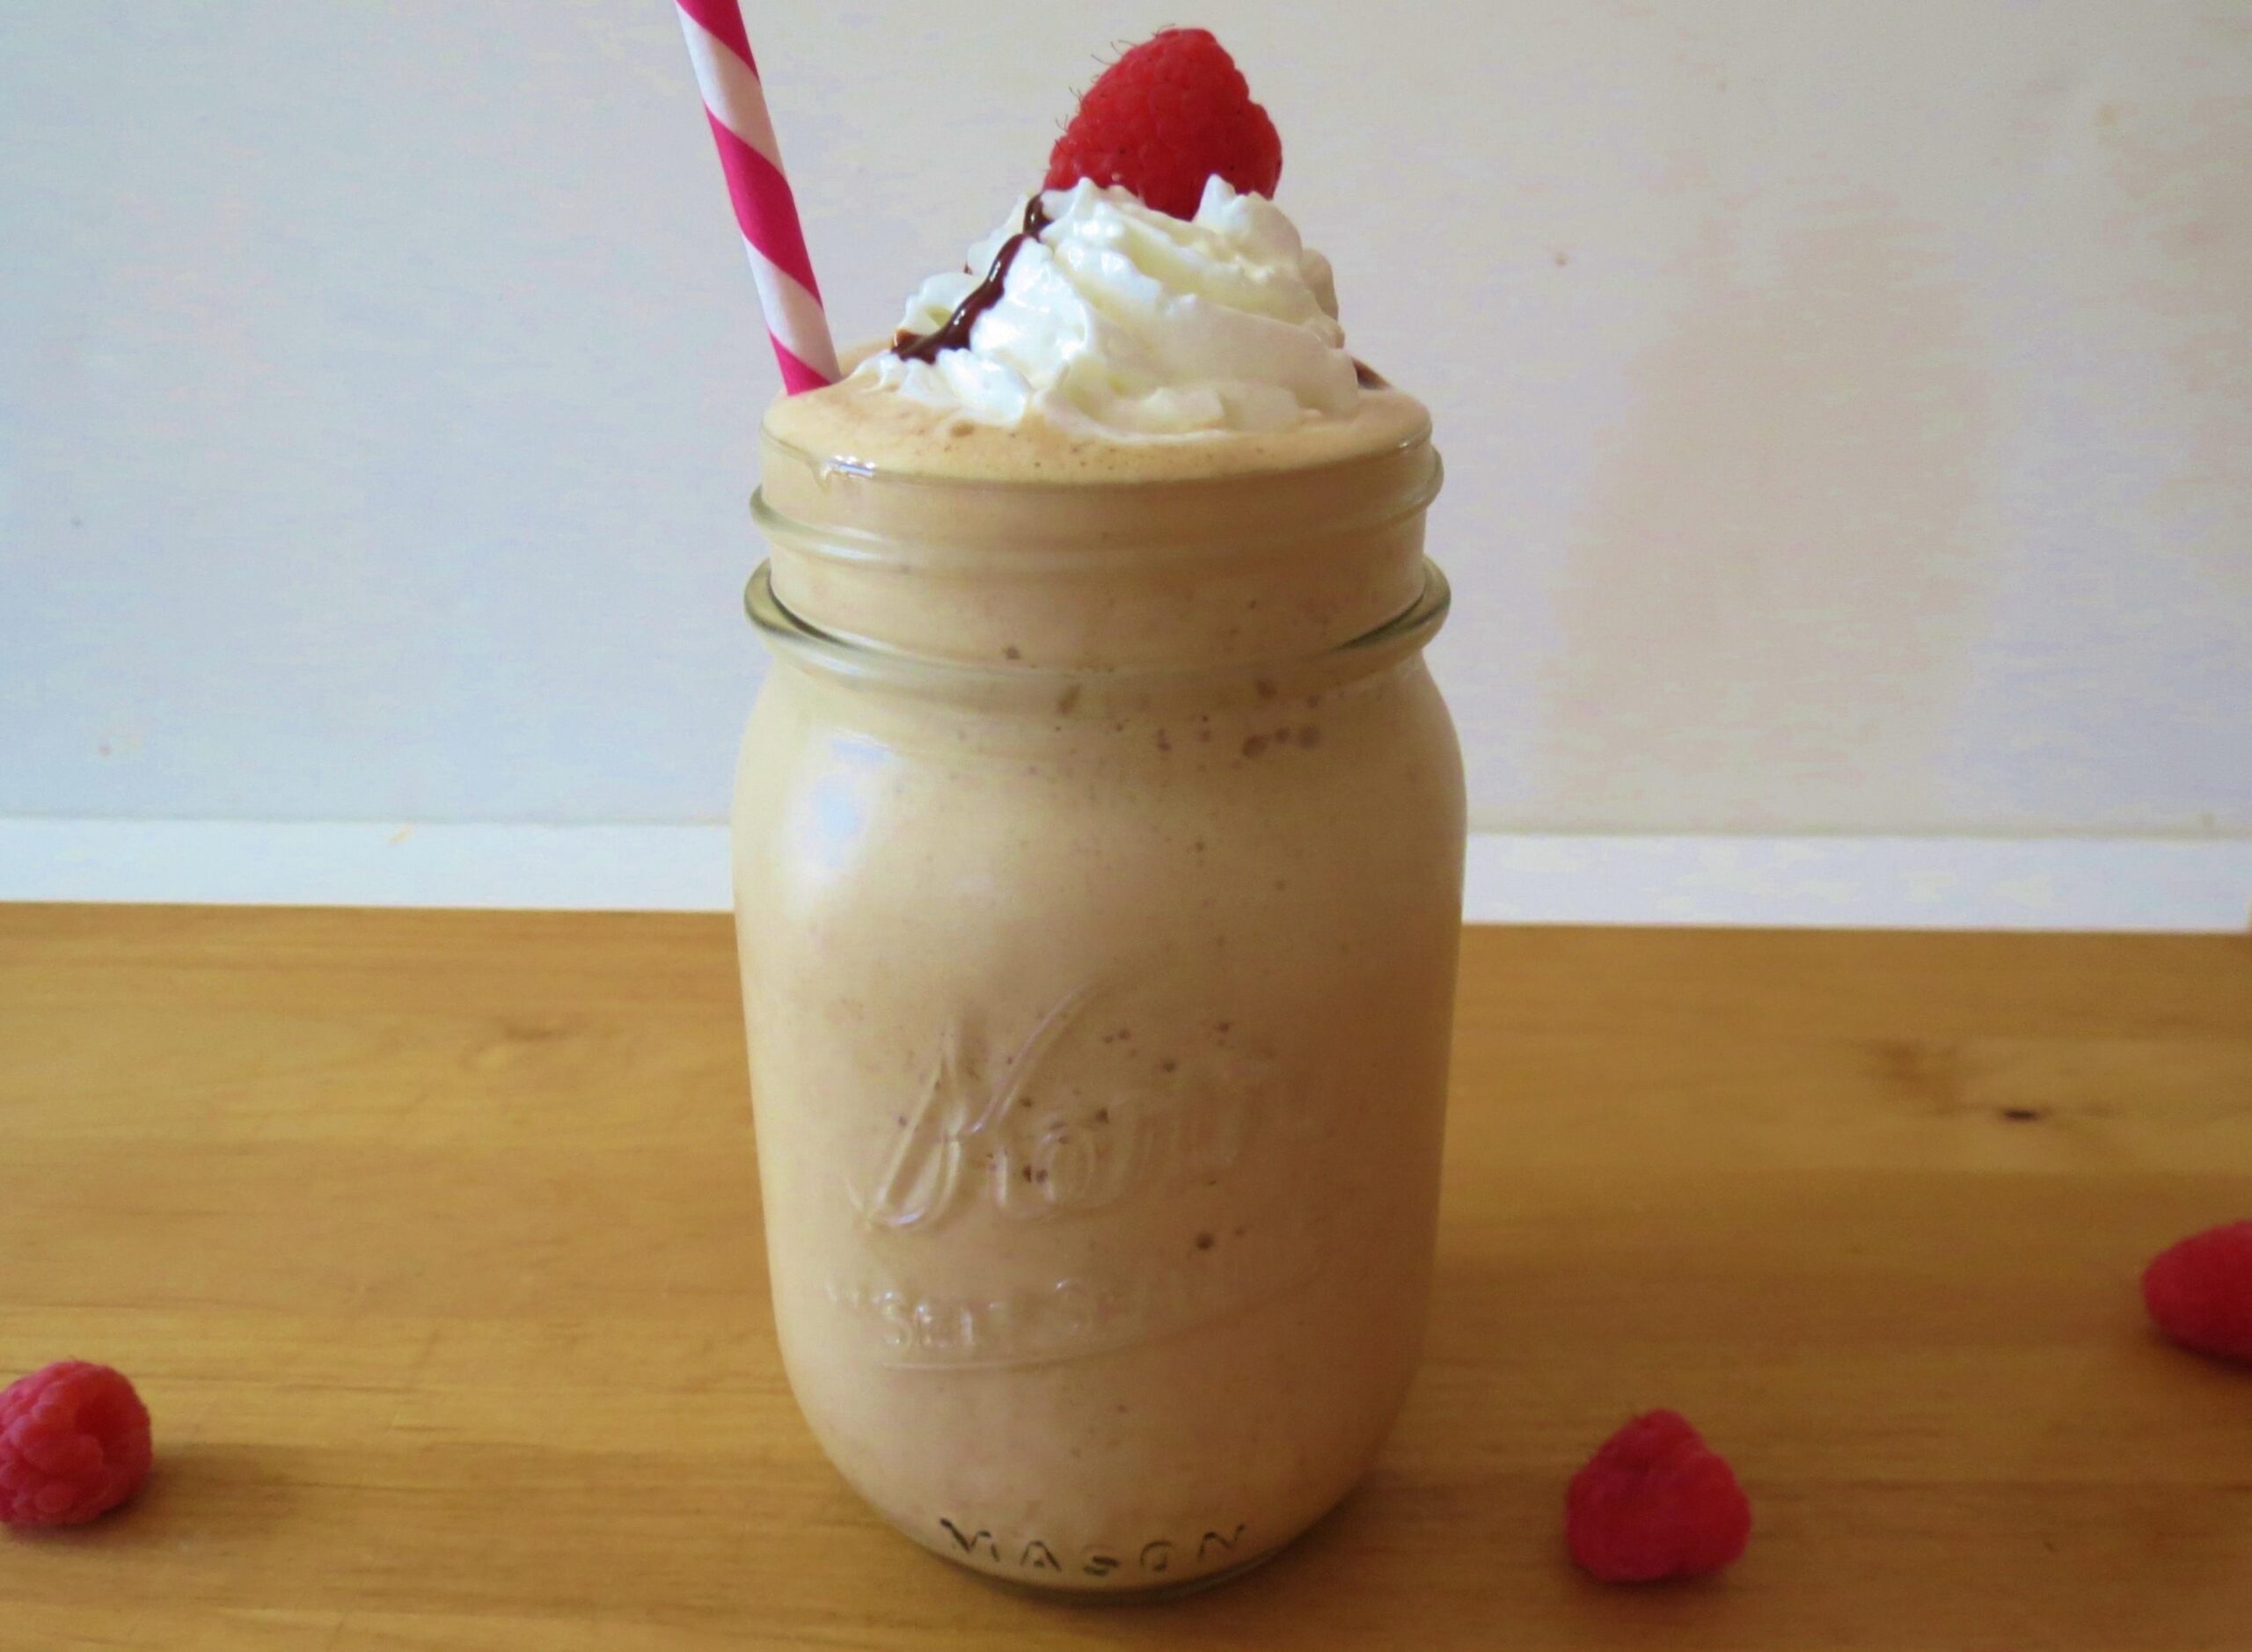  Get your morning caffeine fix with this refreshing Raspberry Coffee Frappe!